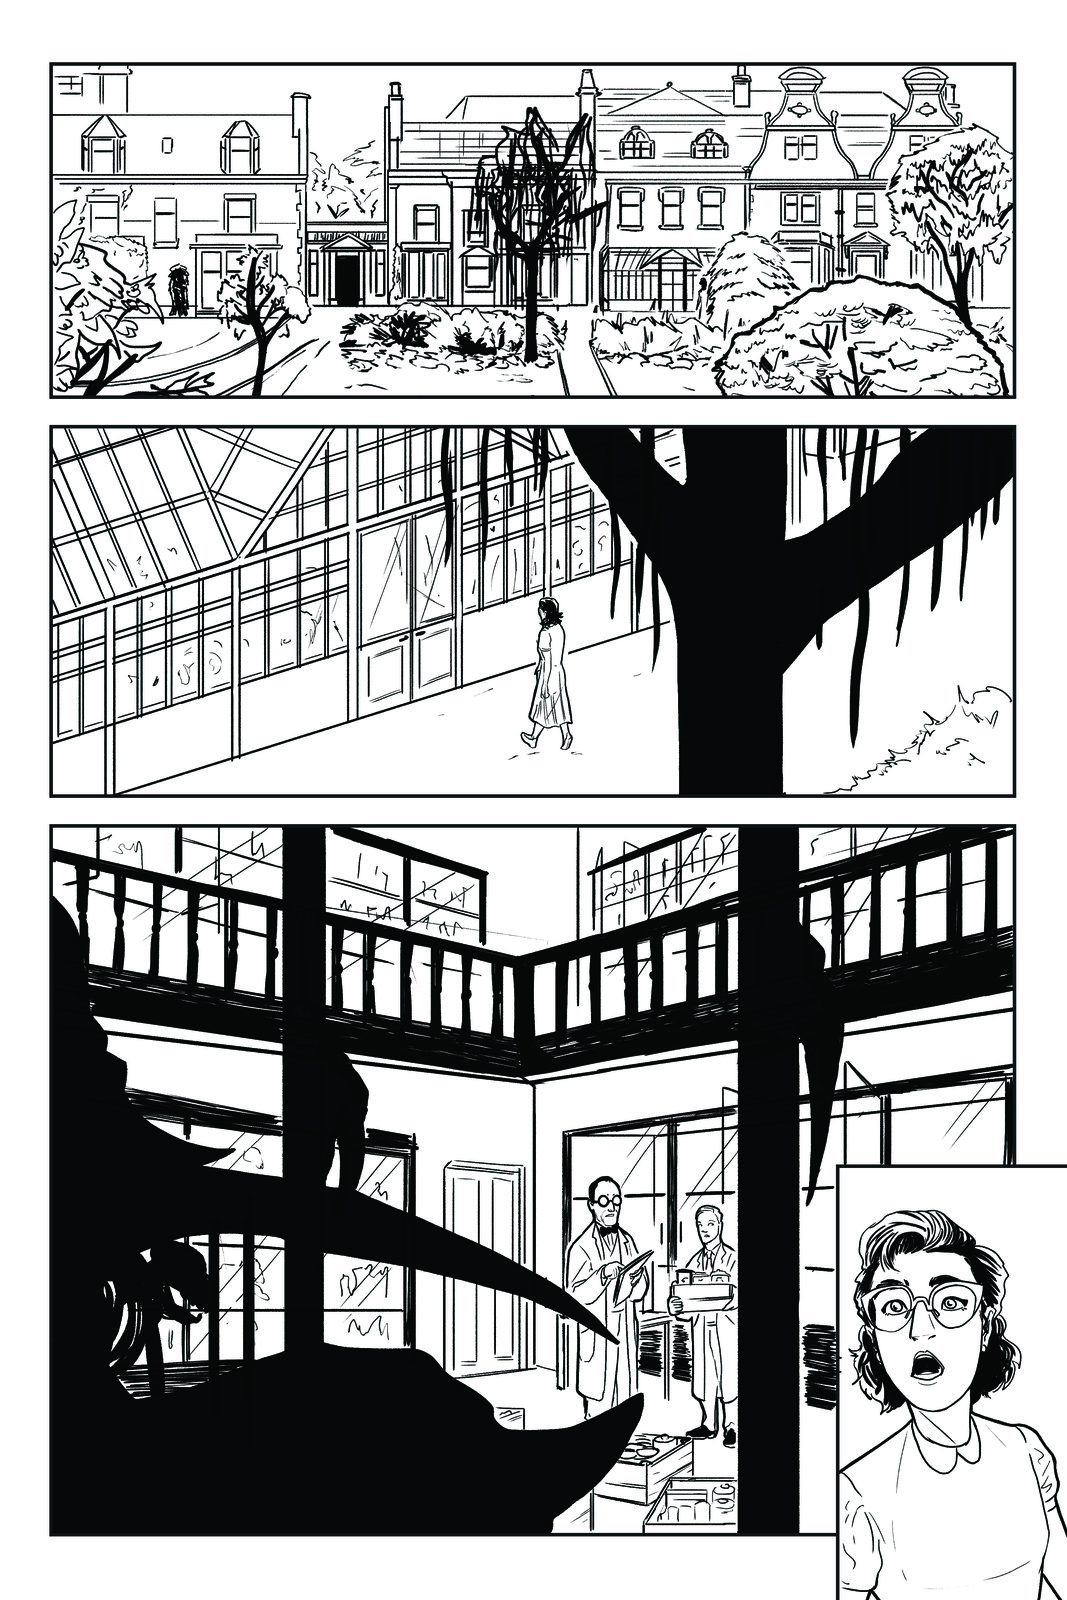 Page 1 Inks